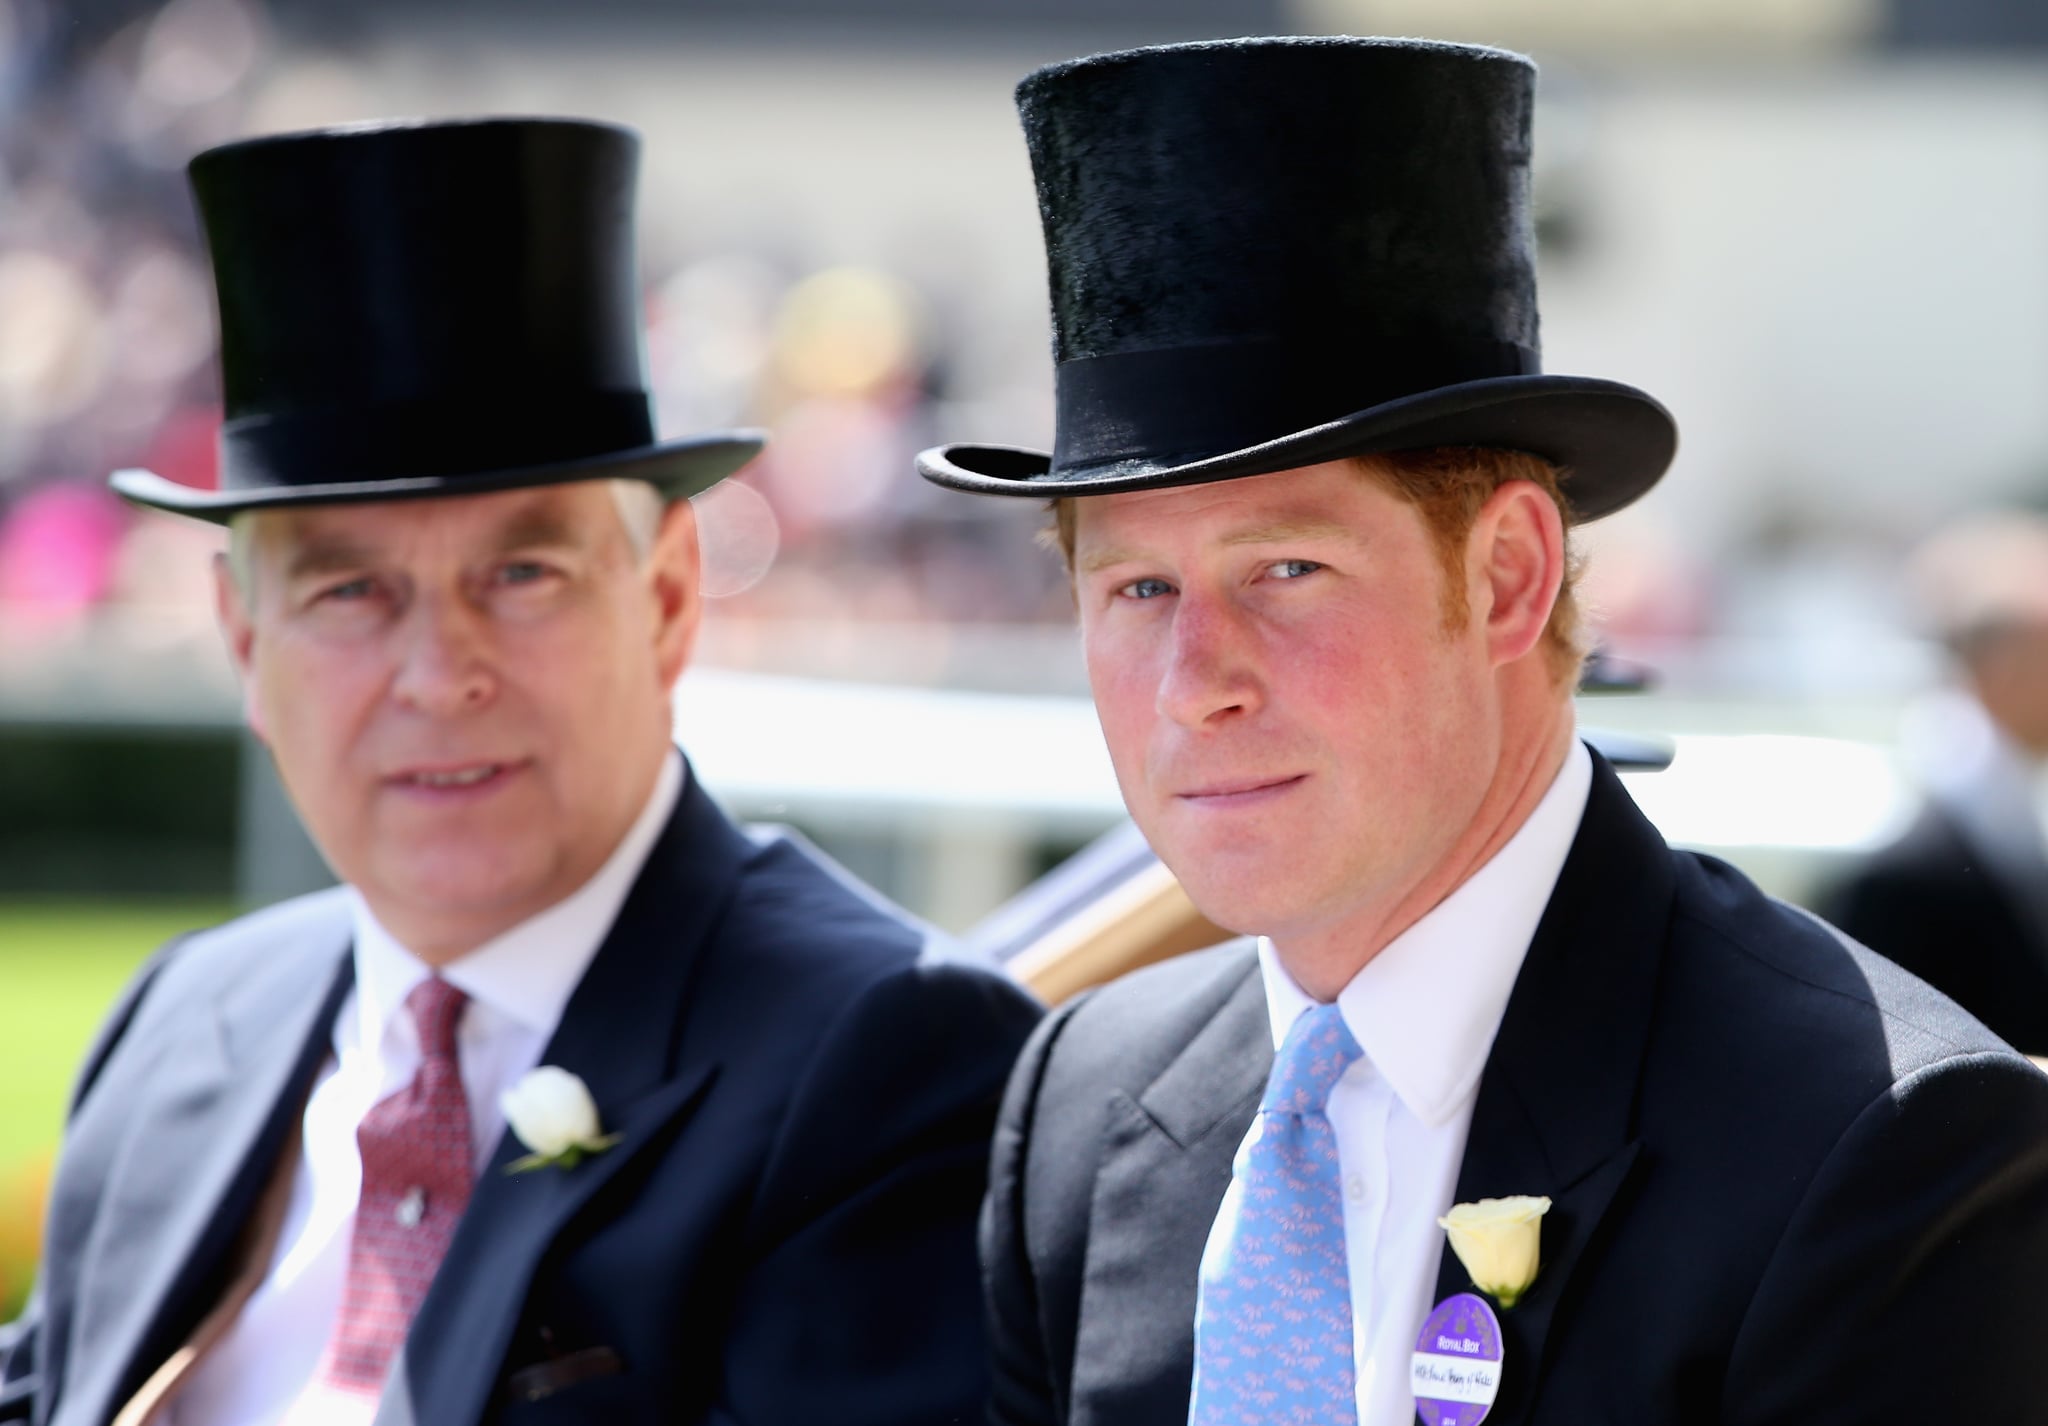 ASCOT, UK - JUNE 17: (LR) Prince Andrew, Duke of York and Prince Harry attend the opening day of Royal Ascot at Ascot Racecourse on June 17, 2014 in Ascot, England increase.  (Photo by Chris Jackson/Getty Images for Ascot Racecourse)